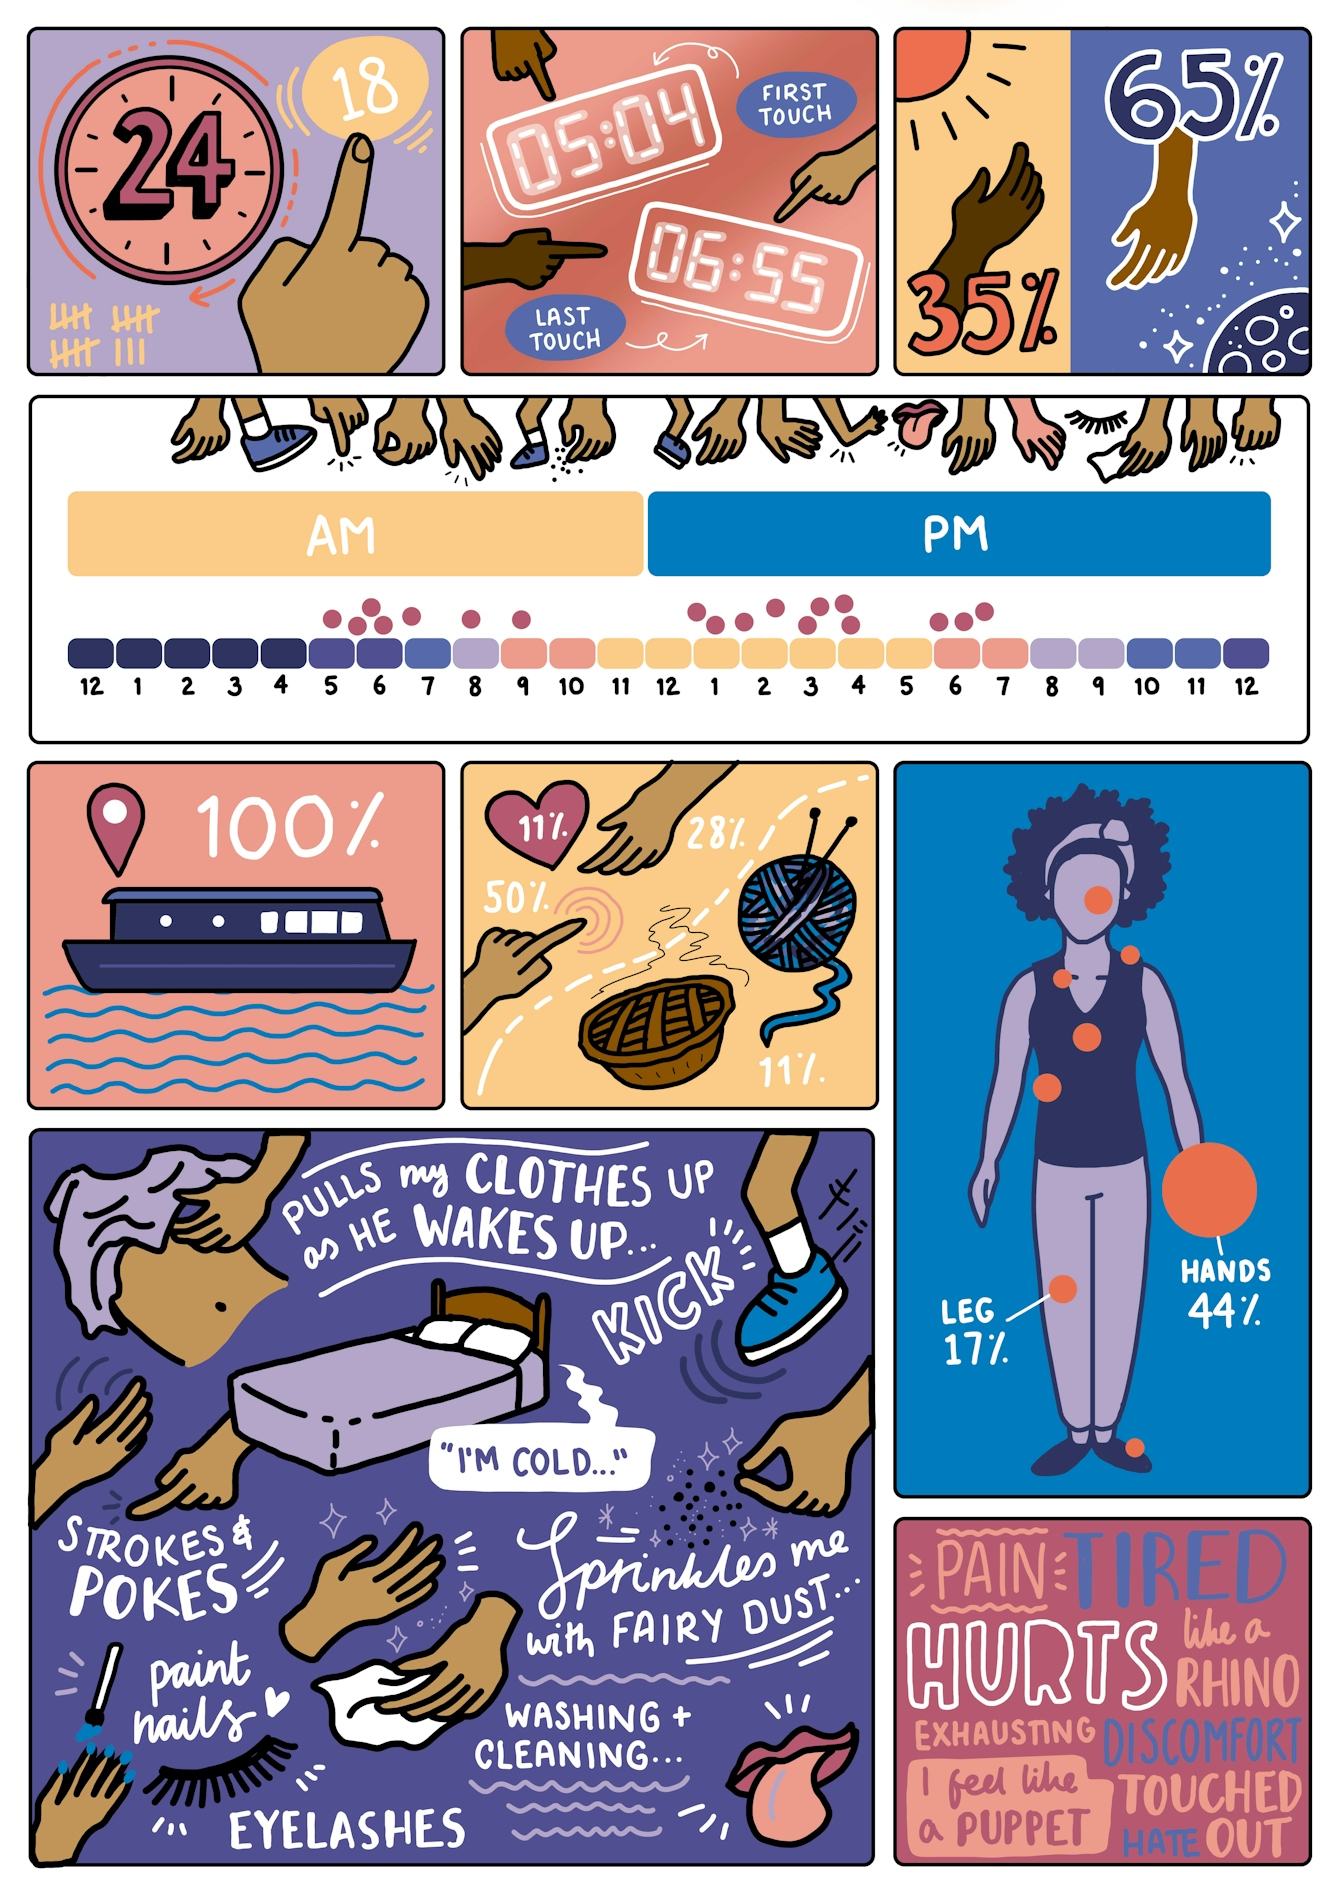 Digital illustration infographic showing data about Charmaine Wombwell and the different touches she encounters in a day. 